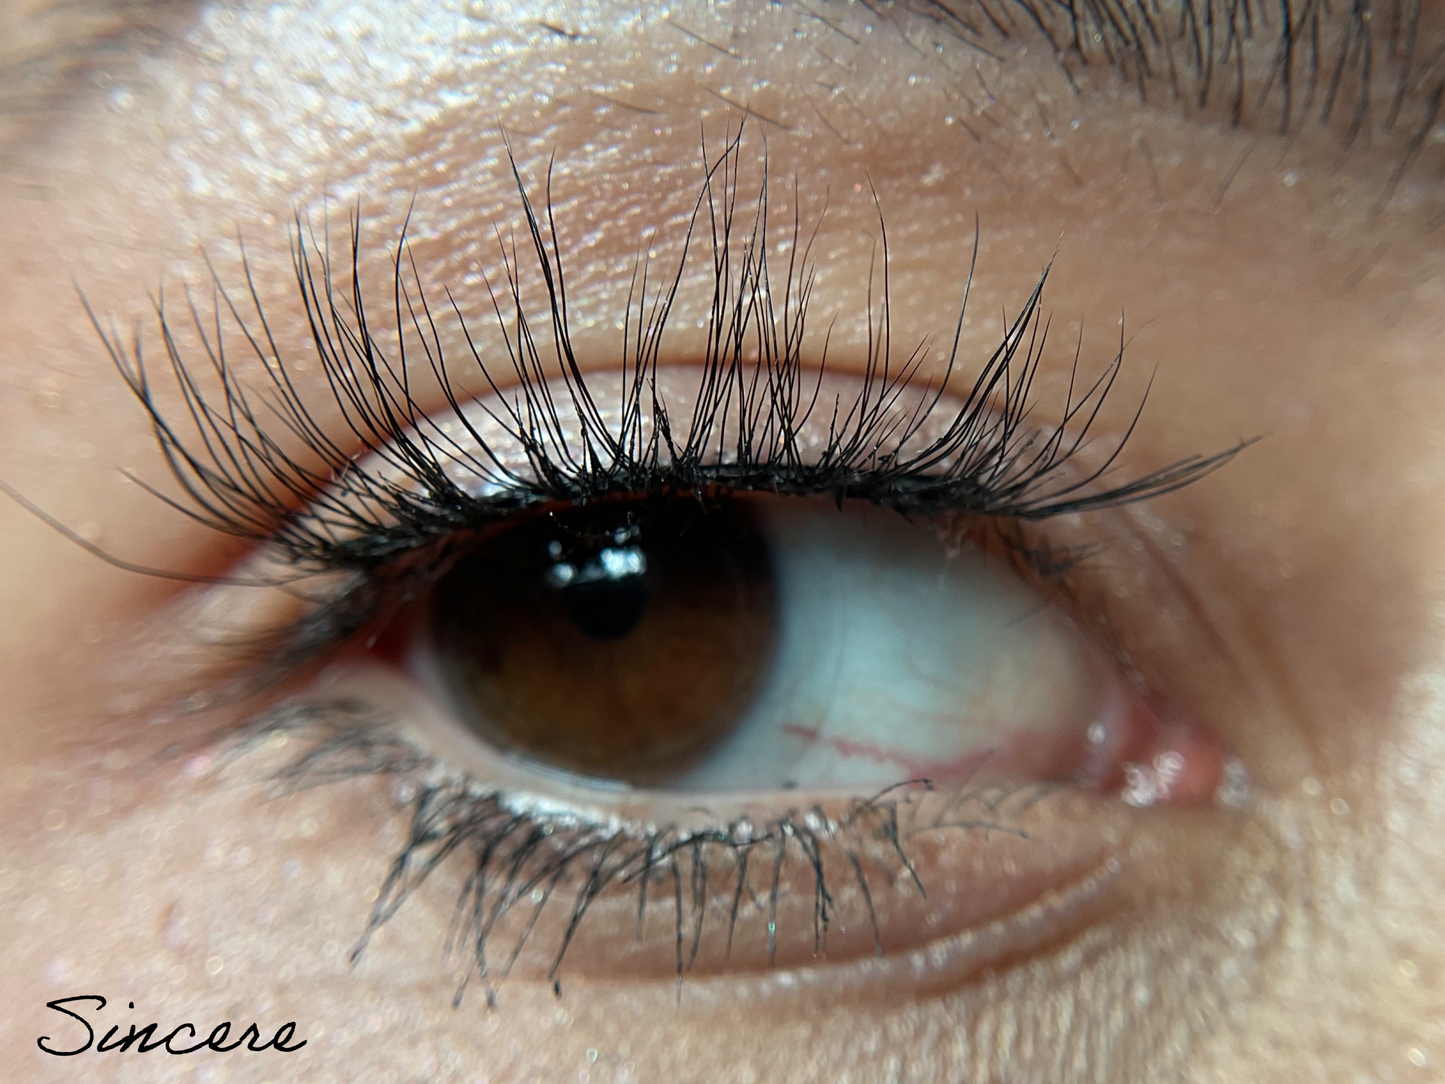 "she is..." synthetic silk lashes